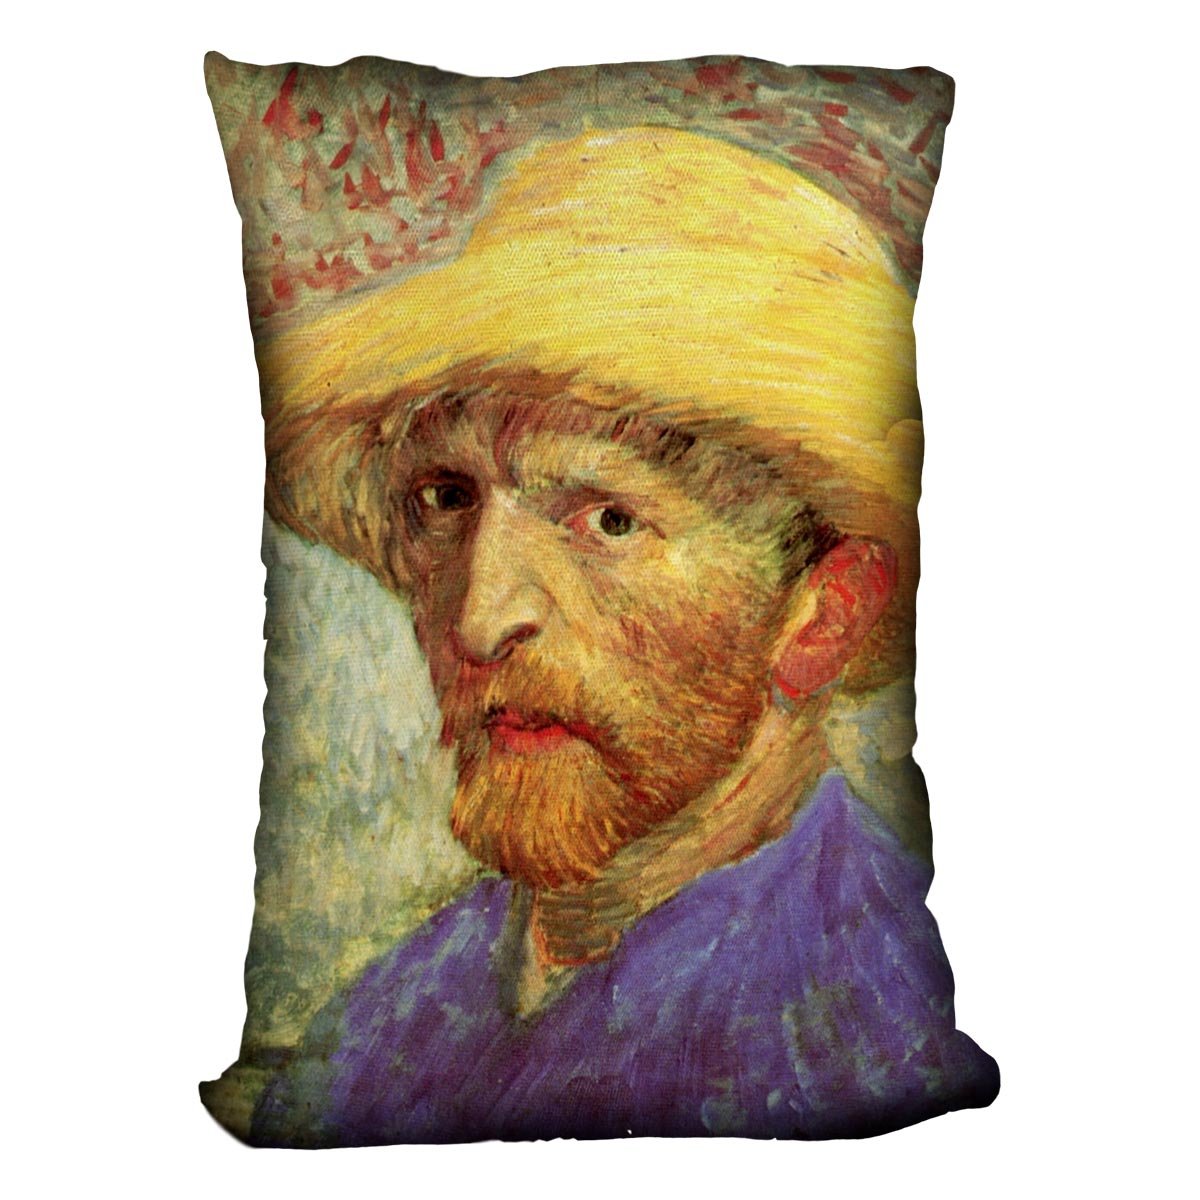 Self-Portrait with Straw Hat 3 by Van Gogh Throw Pillow